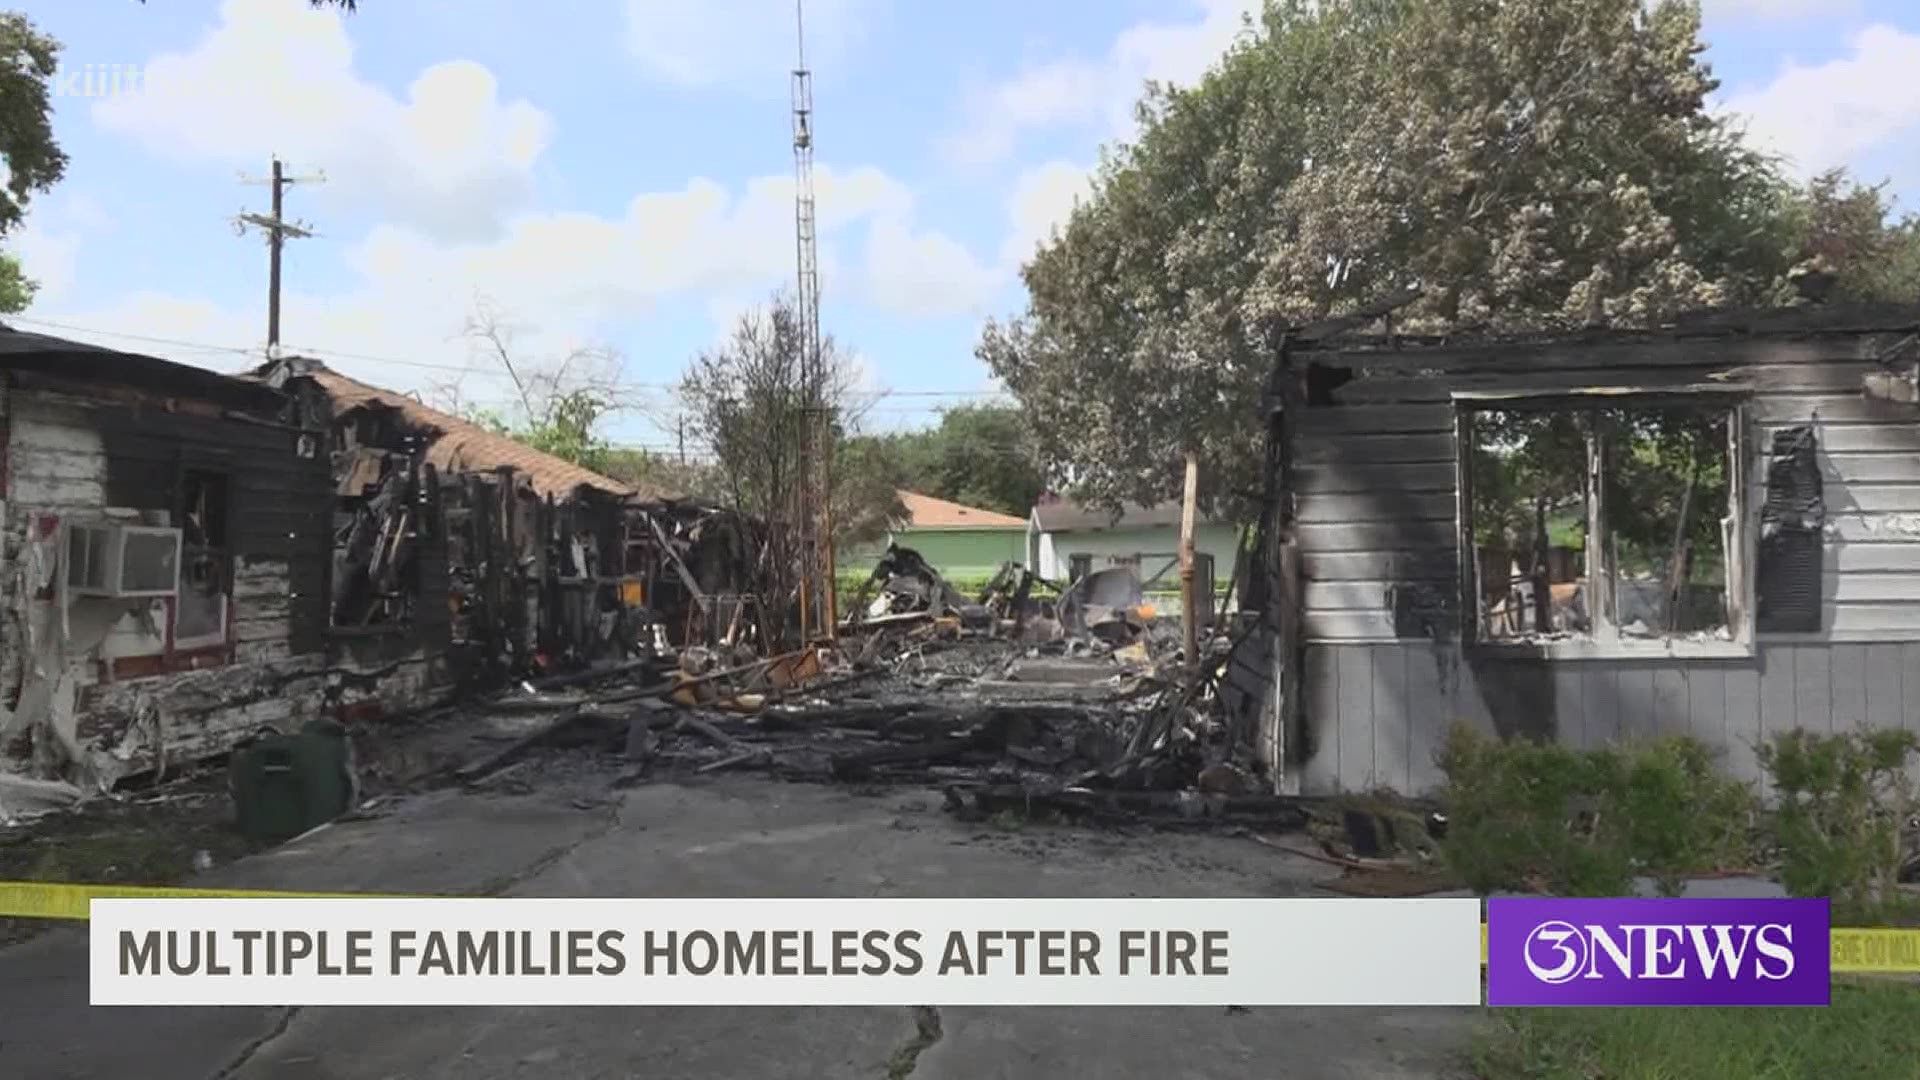 Sheriff Oscar Rivera said the home where the fire started was the target of a drive-by shooting last week.